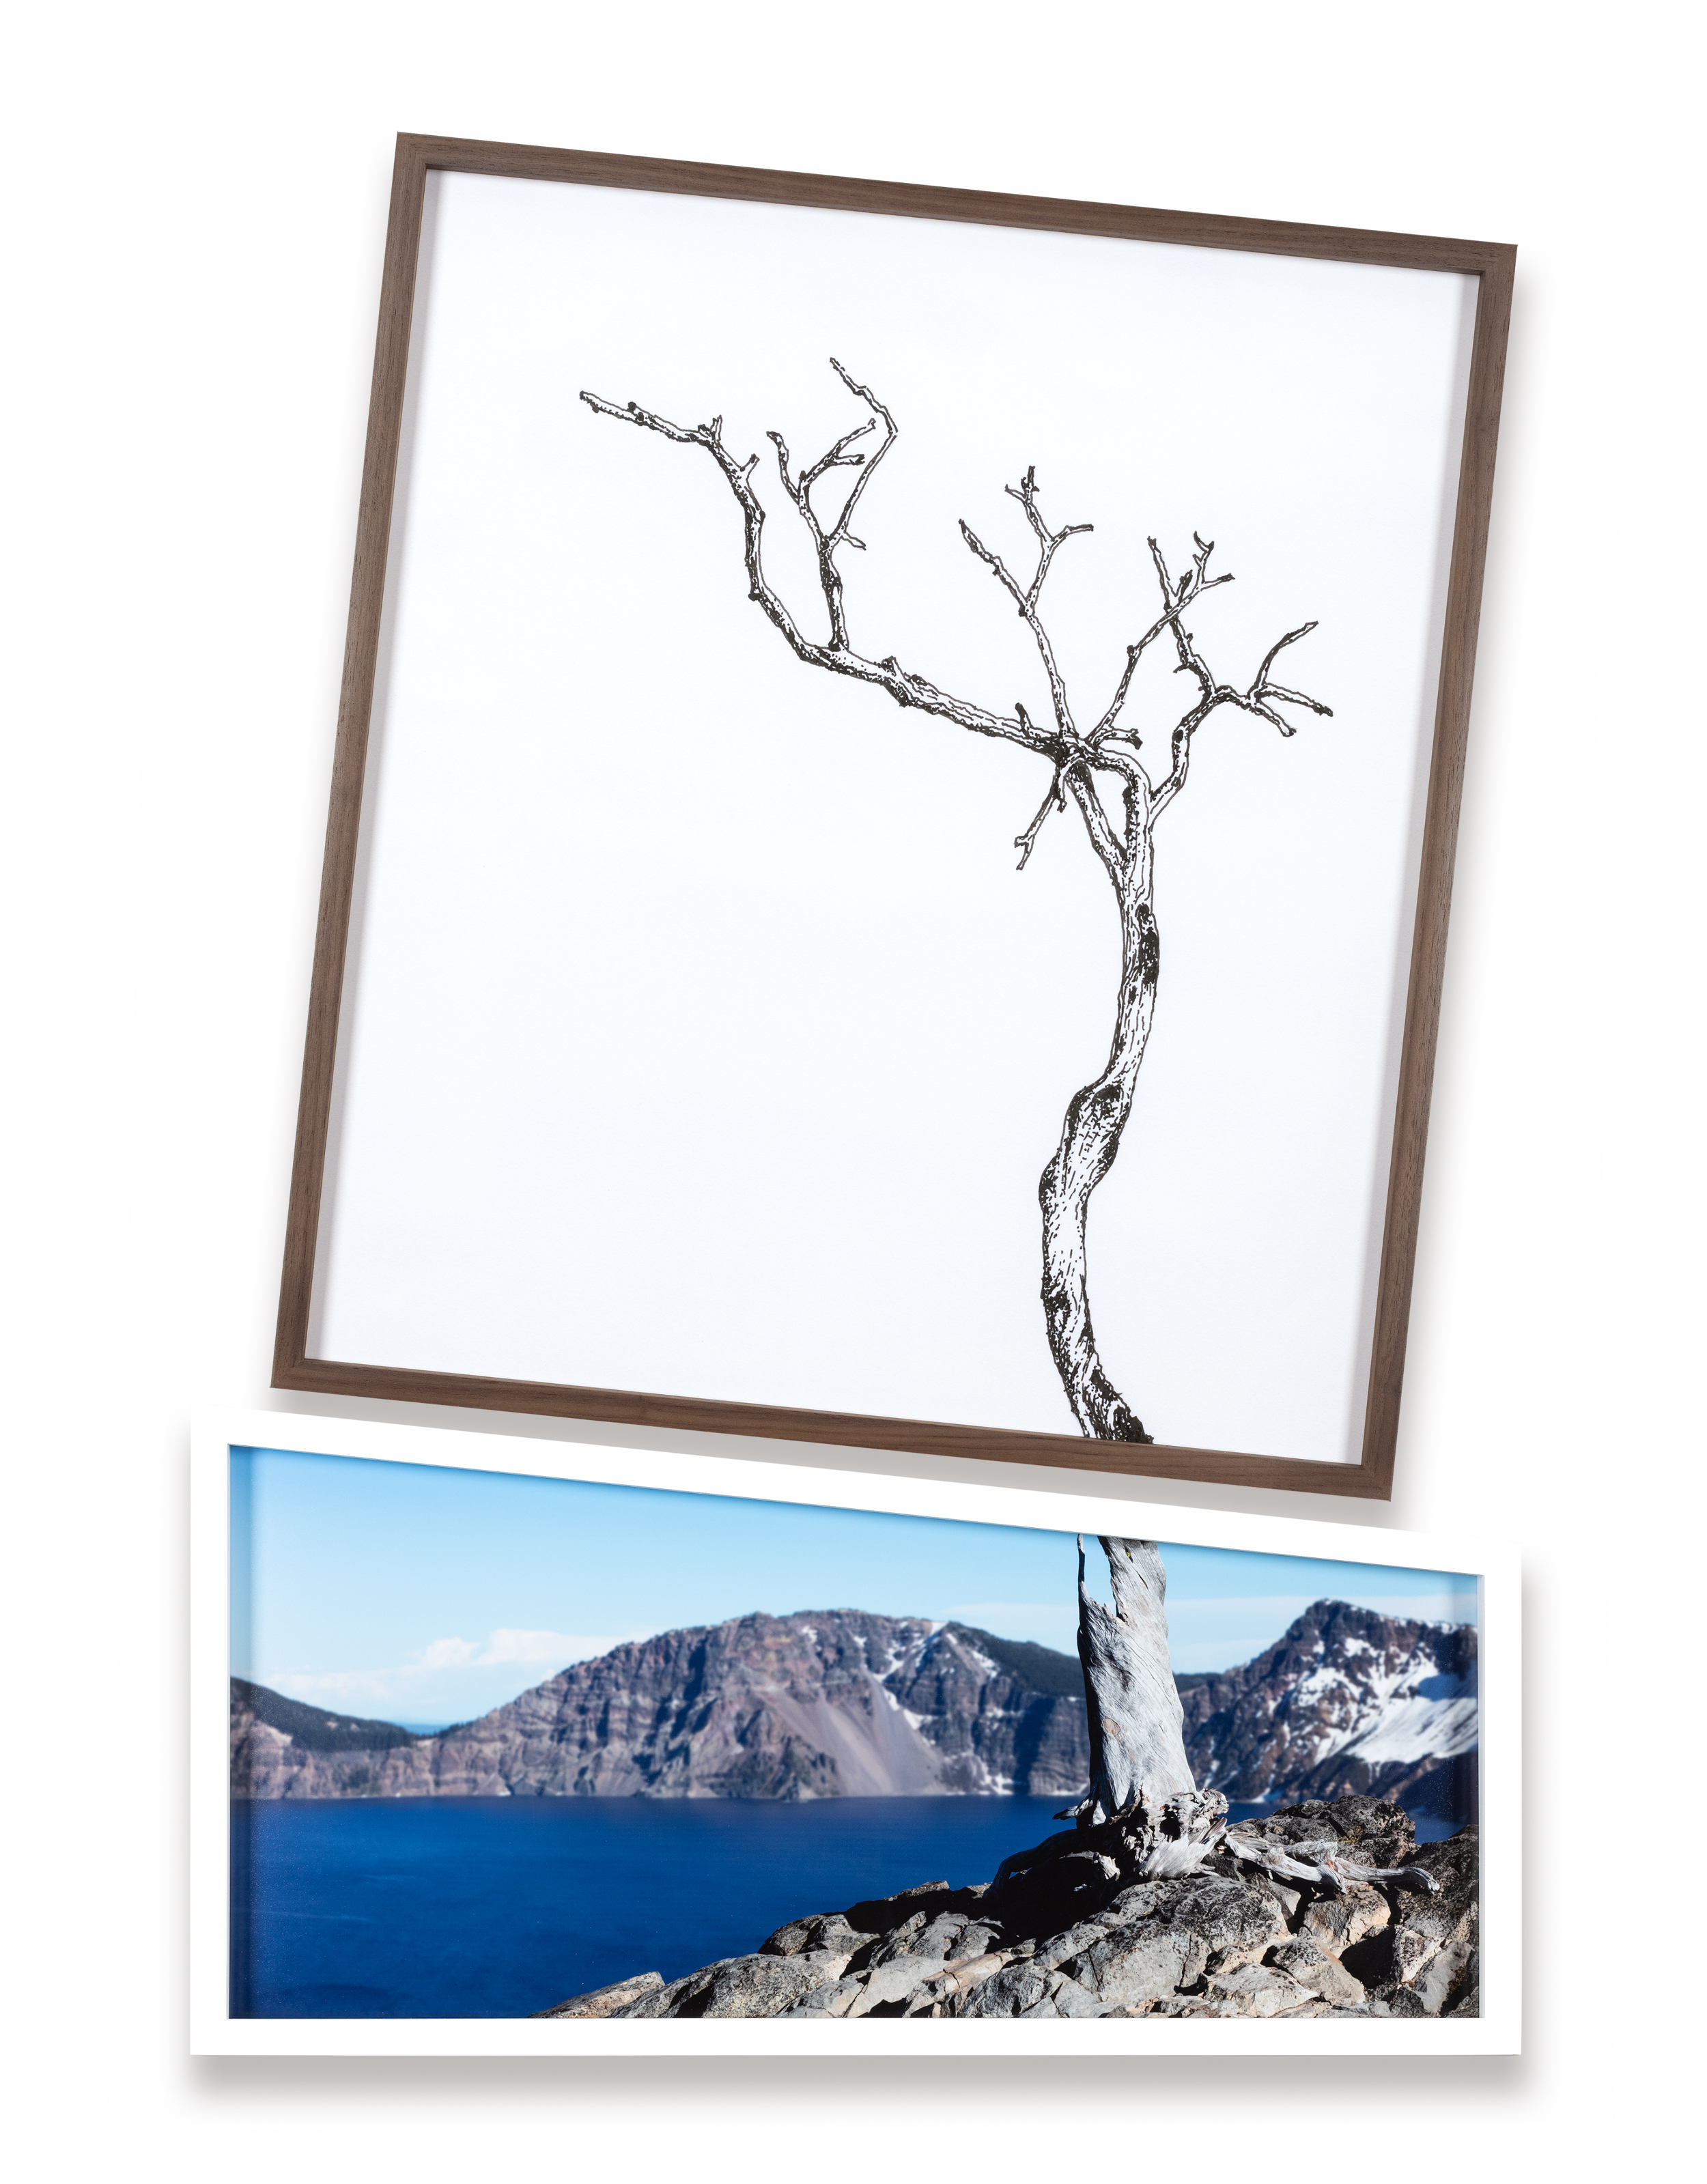 Color image of a diptych depicting a bare tree amongst the landscape with the top half being an illustration against white background and the bottom half a color photograph